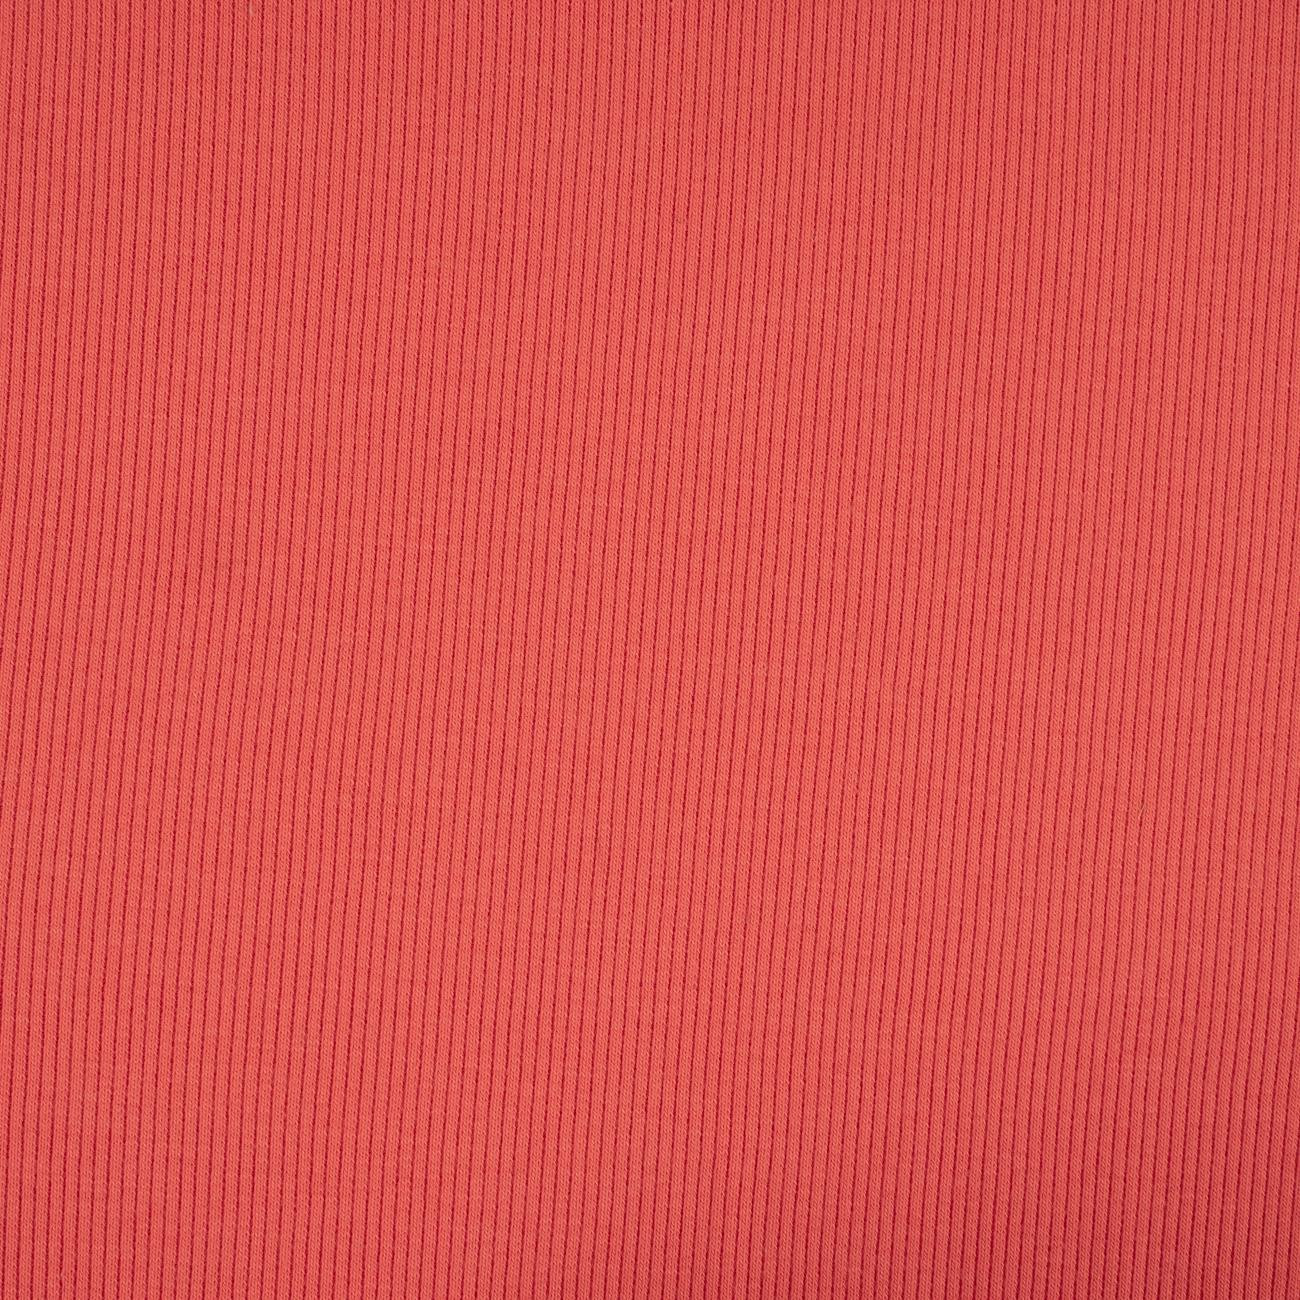 D-169 CORAL - Ribbed knit fabric